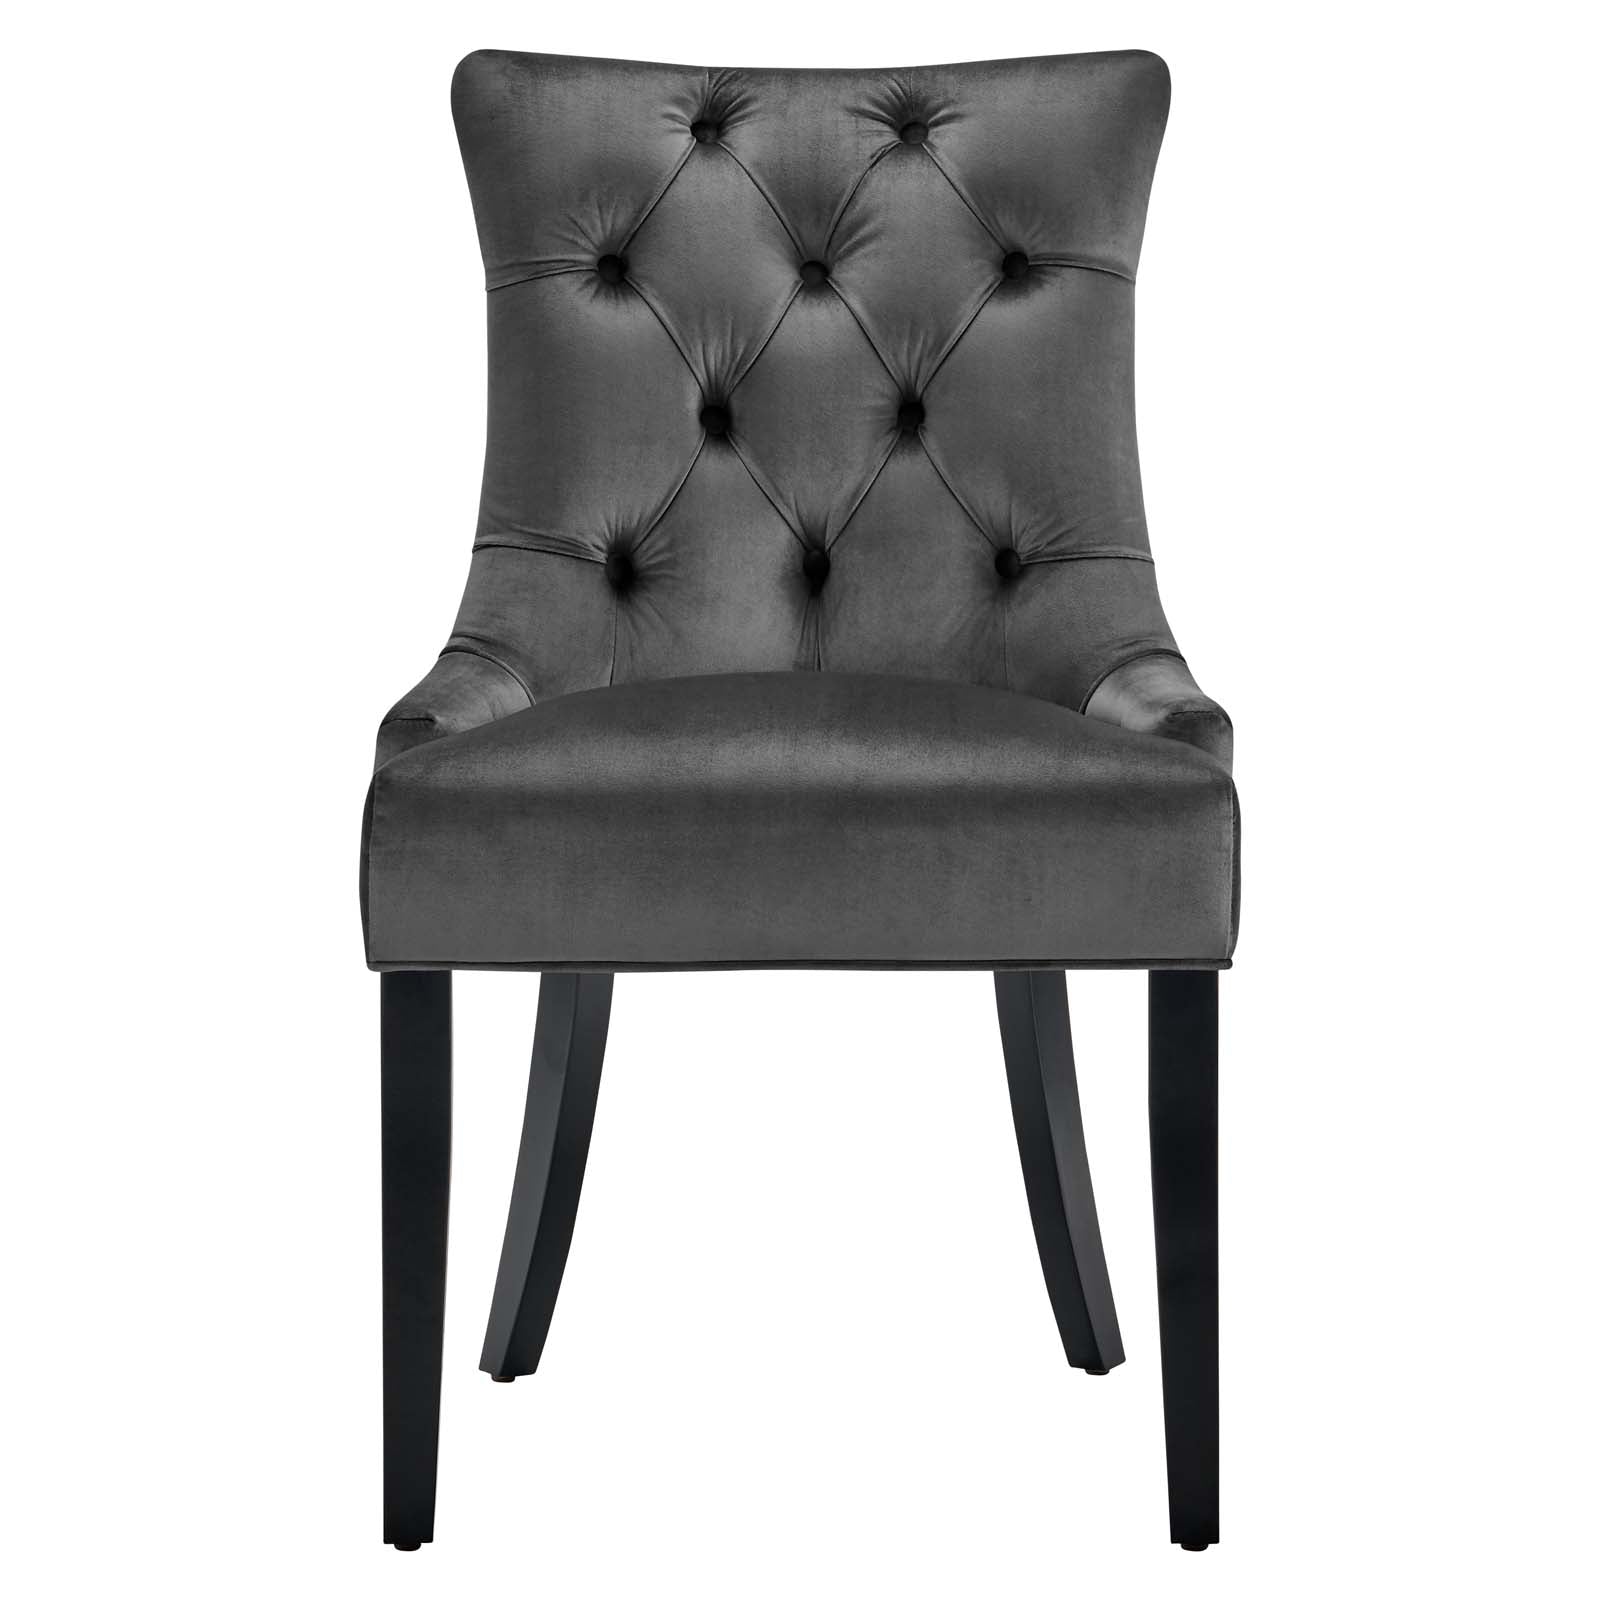 Modway Dining Chairs - Regent Tufted Performance Velvet Dining Side Chairs - ( Set of 2 ) Charcoal